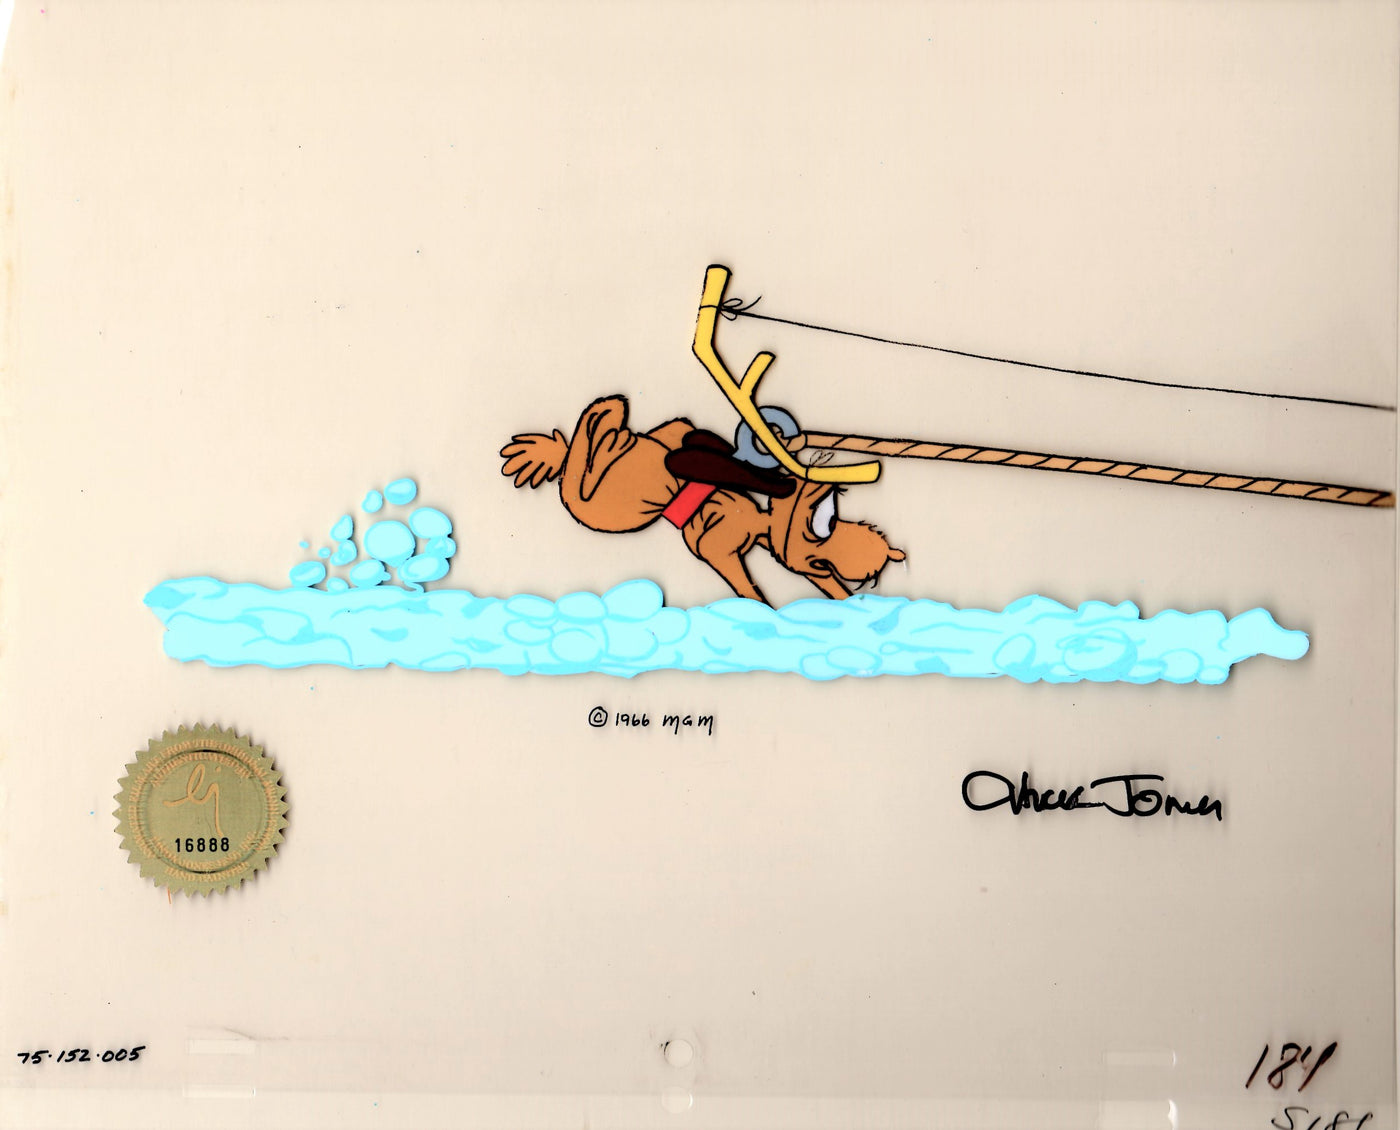 Original MGM Studios Production Cel of Max from How the Grinch Stole Christmas